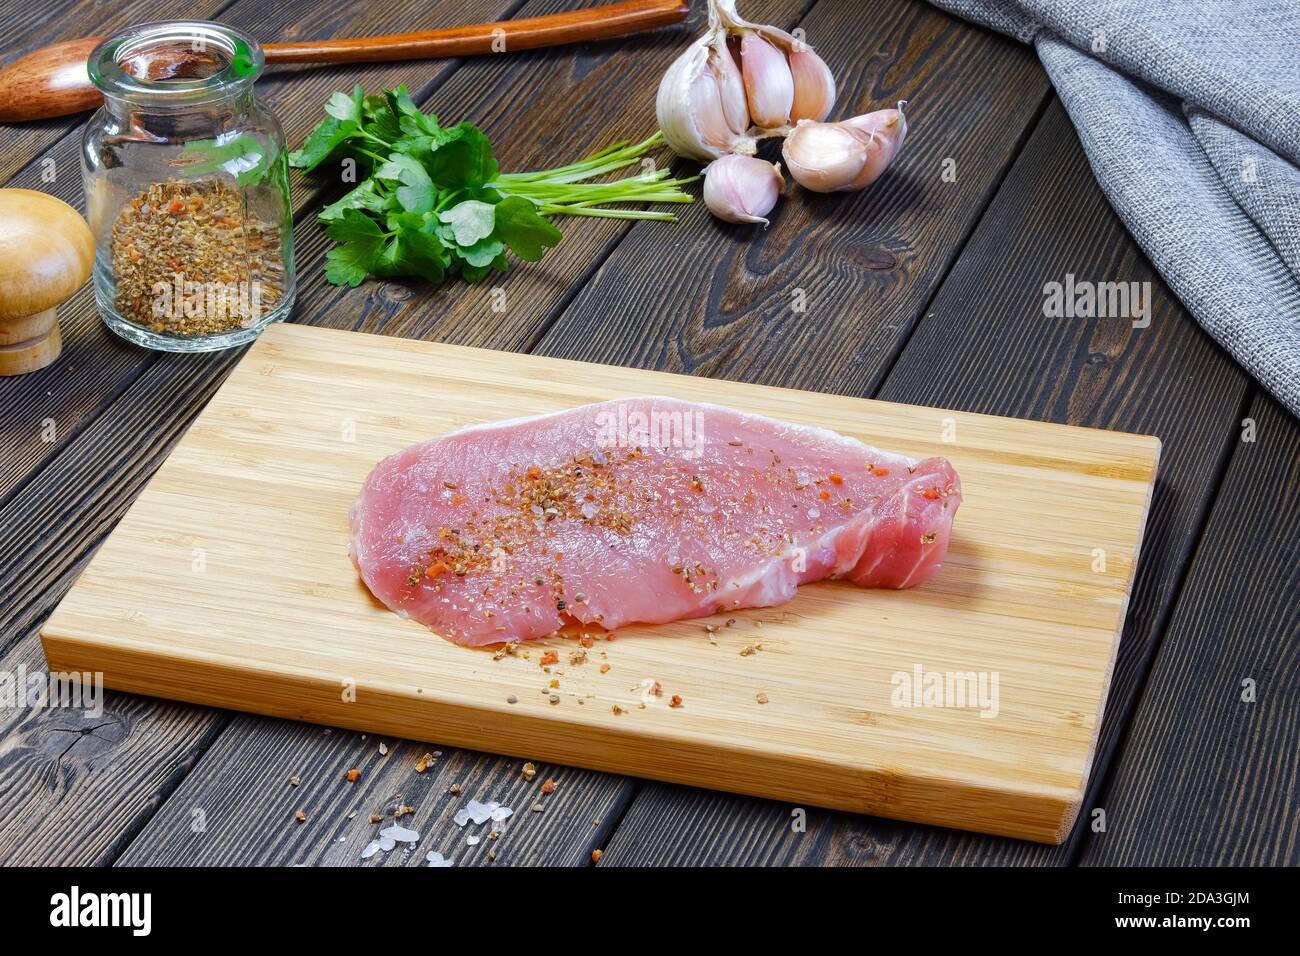 Juicy pieces of steak lie on the cutting Board. Escalope is prepared for frying in a frying pan. Near seasonings and ingredients for cooking Stock Photo